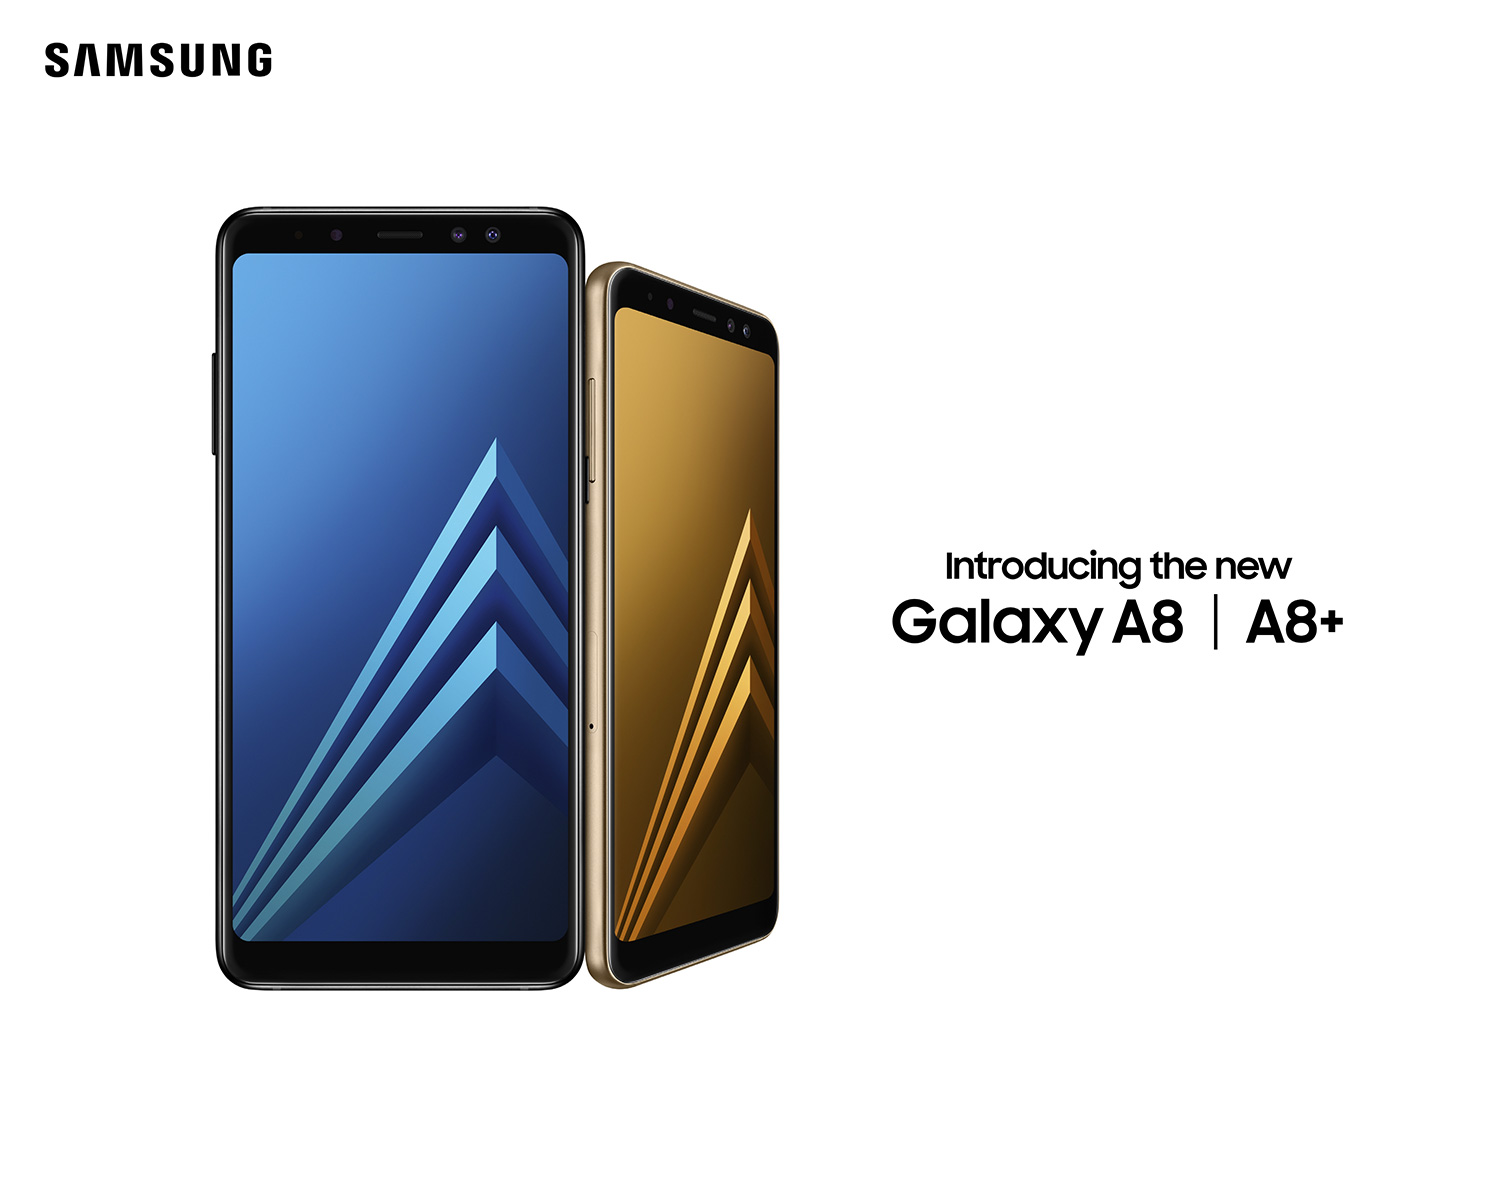 Samsung Galaxy A8 (2018) and A8+ (2018) Officially Announced